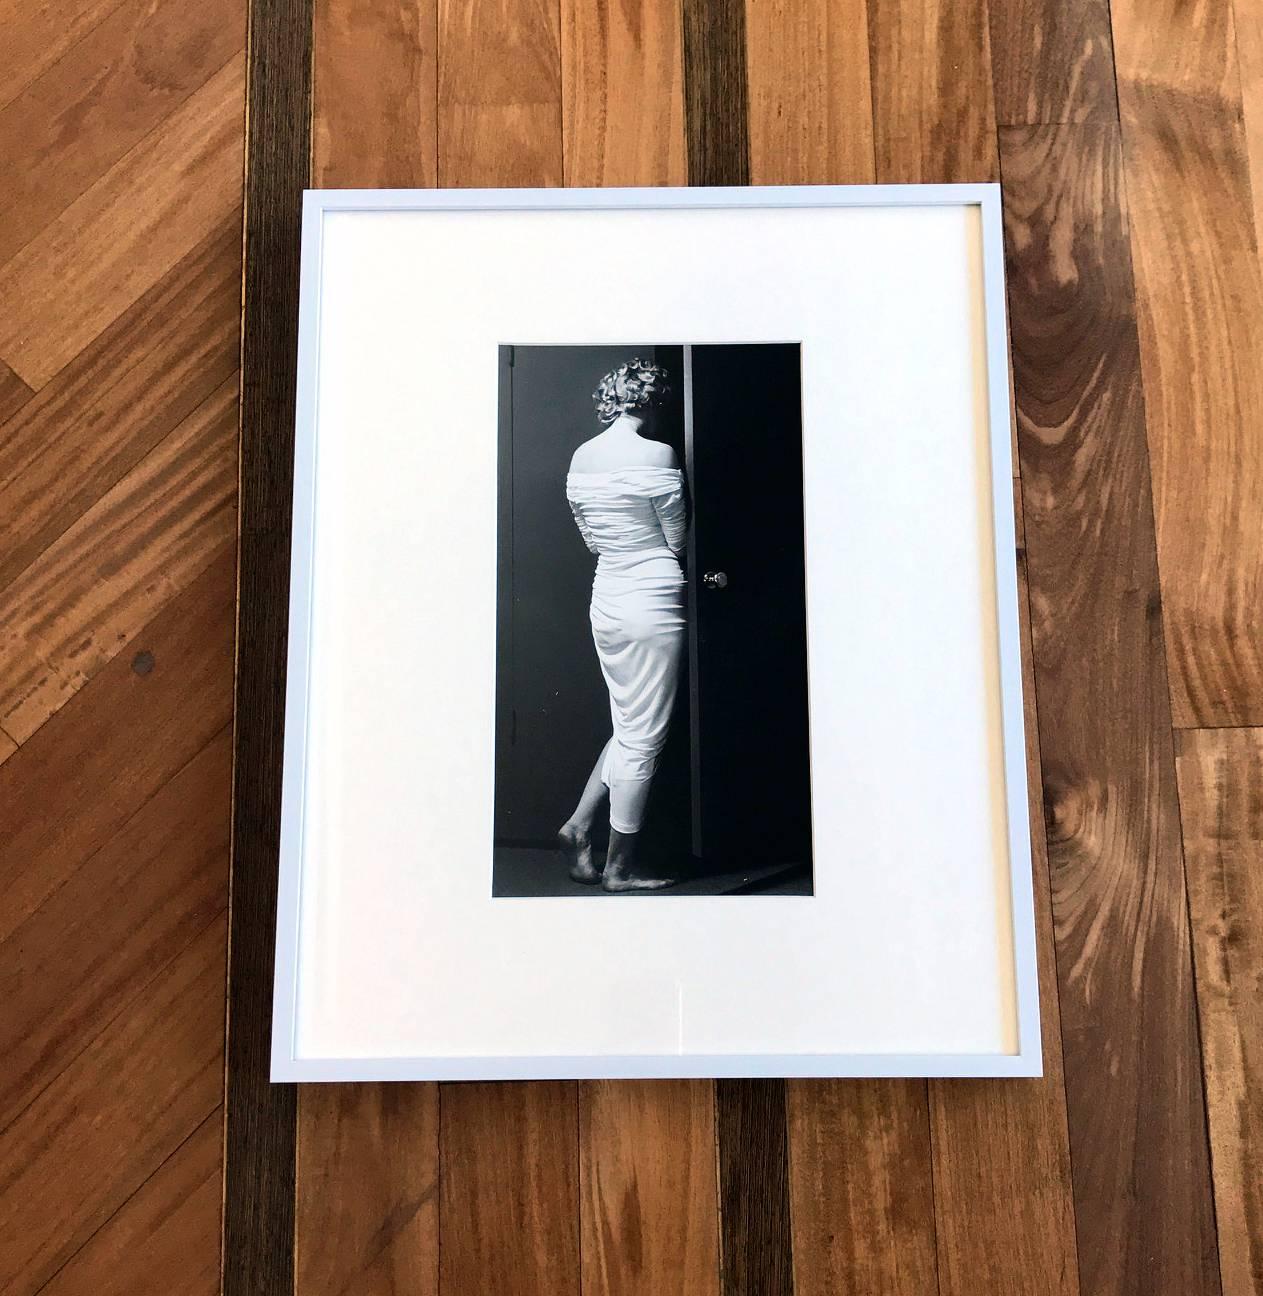 Artist: Philippe Halsman (1906-1979)
Title: Marilyn Entering The Closet
Medium: gelatin silver prints
Date: 1952 printed in 1981
Edition: 186/250
Size: image 12.5